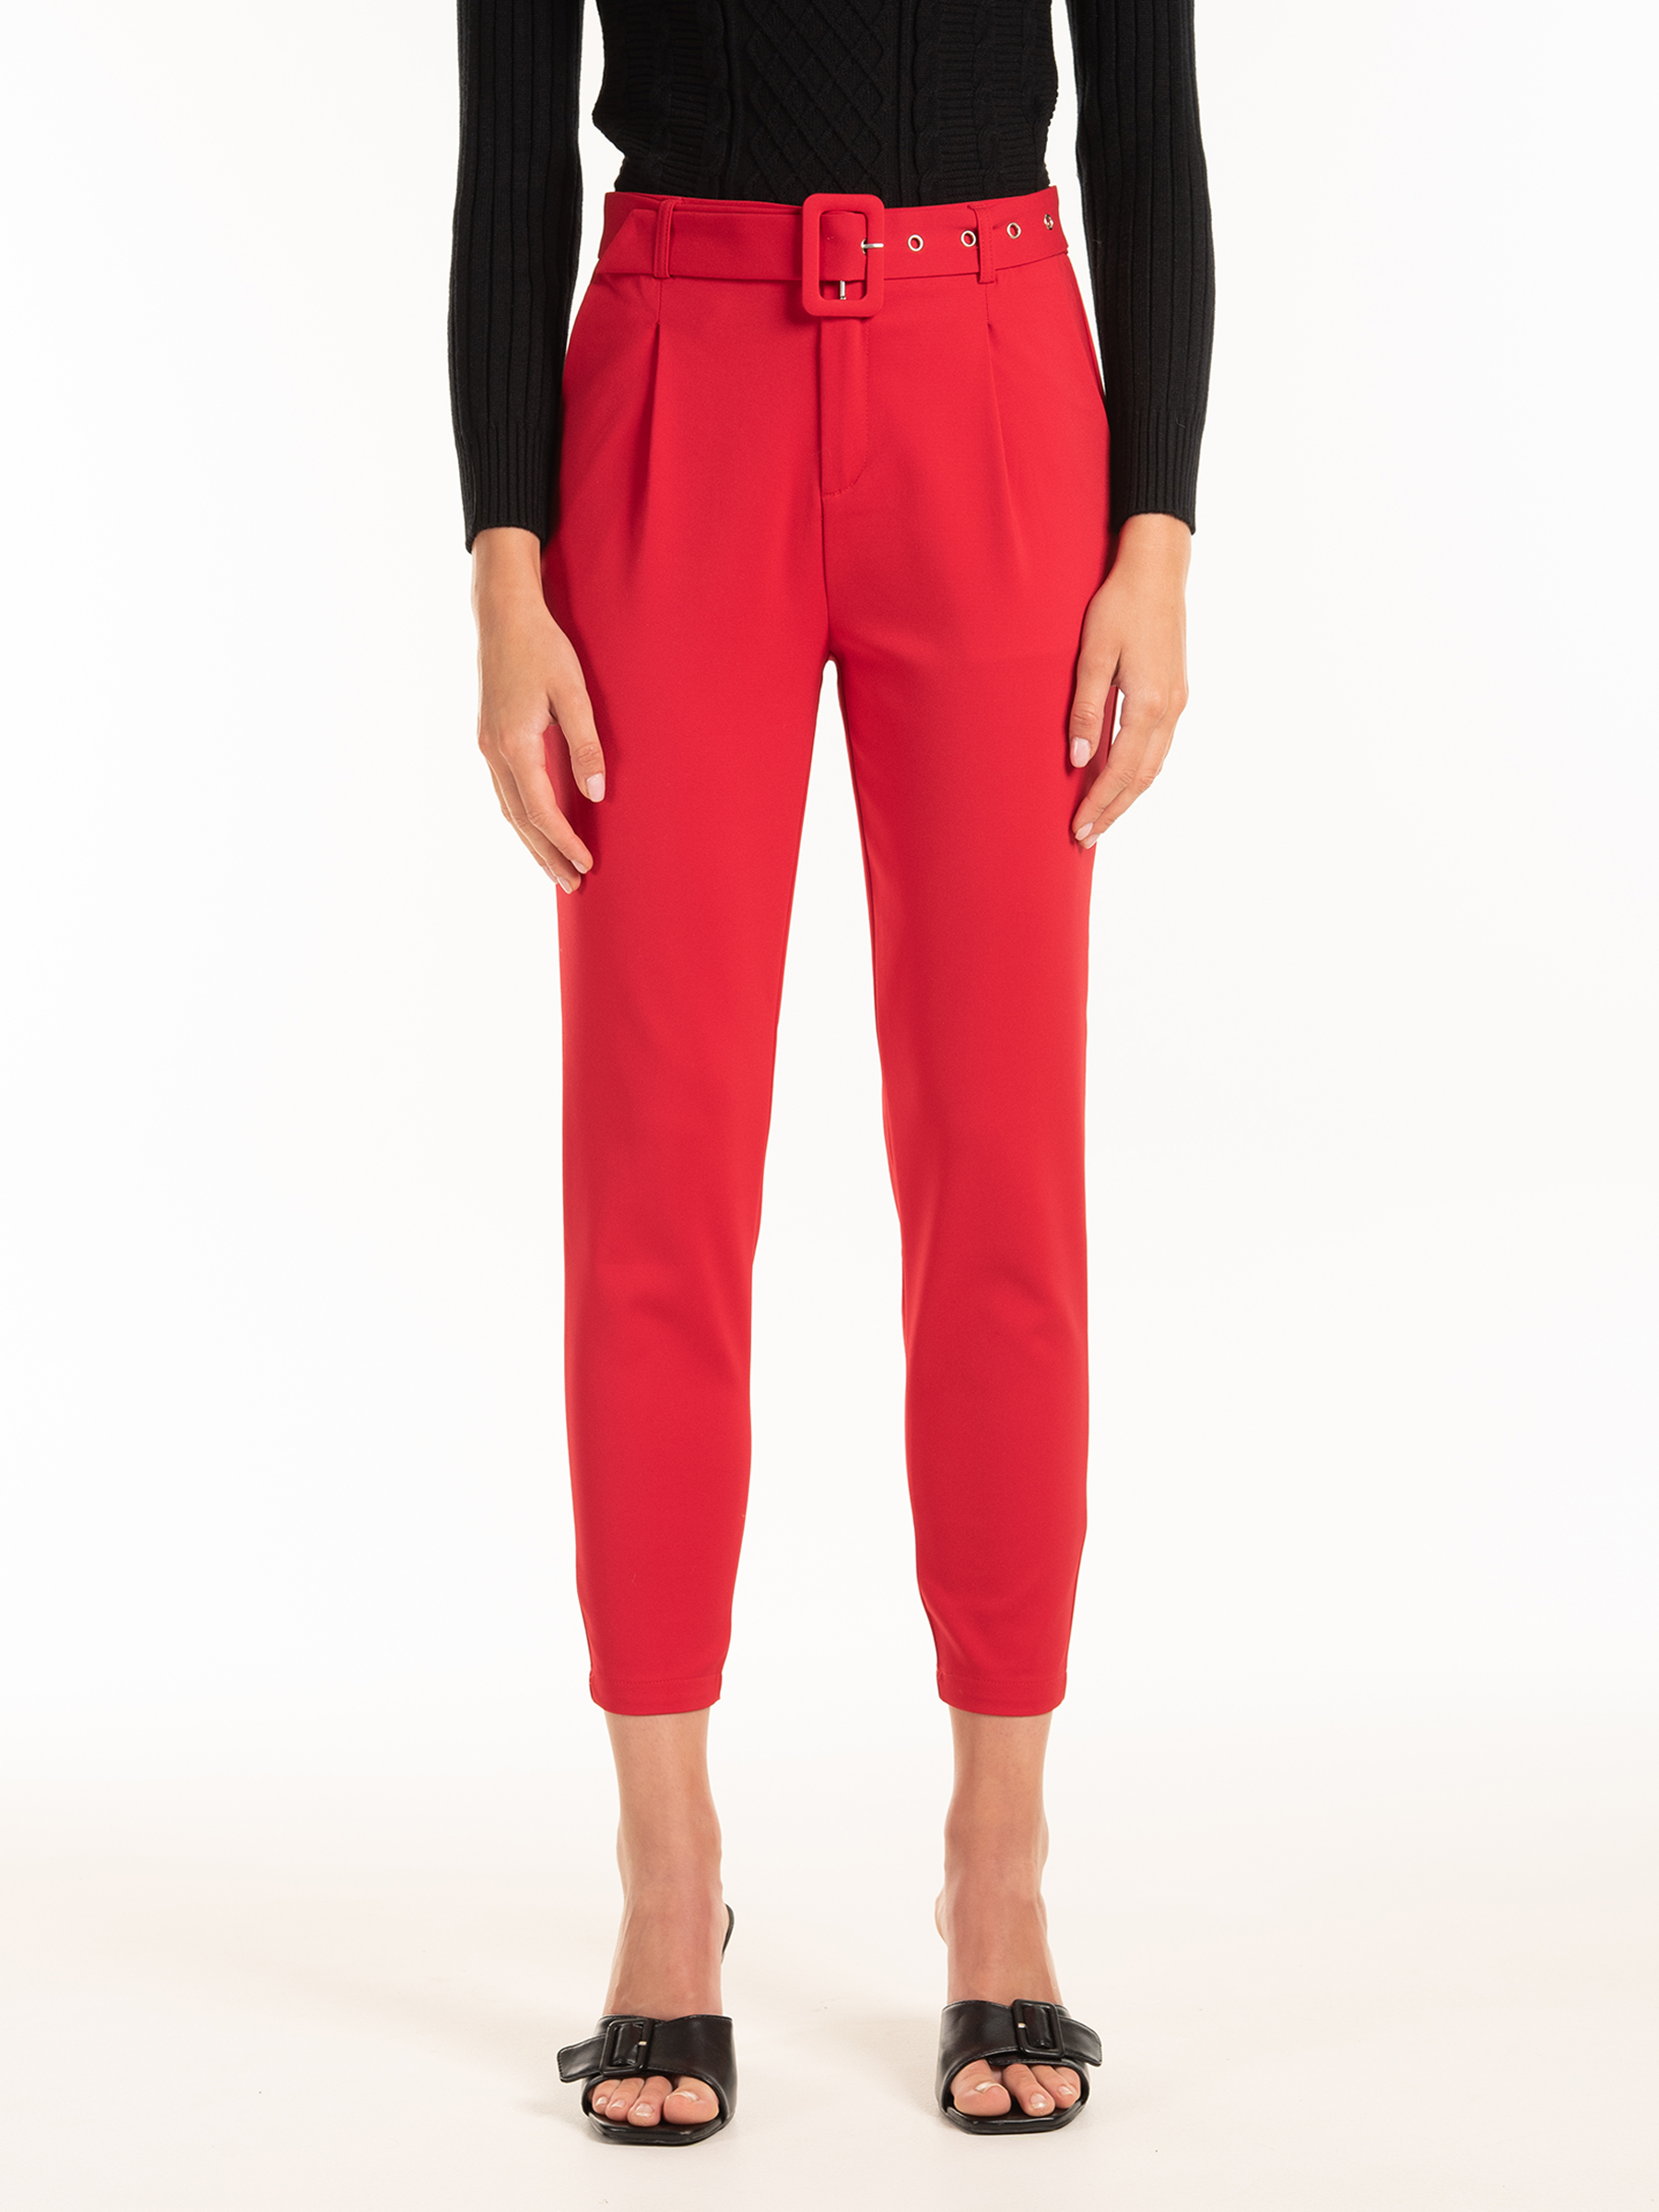 SirawaxBoutique High-Waisted Belted Carrot Pants